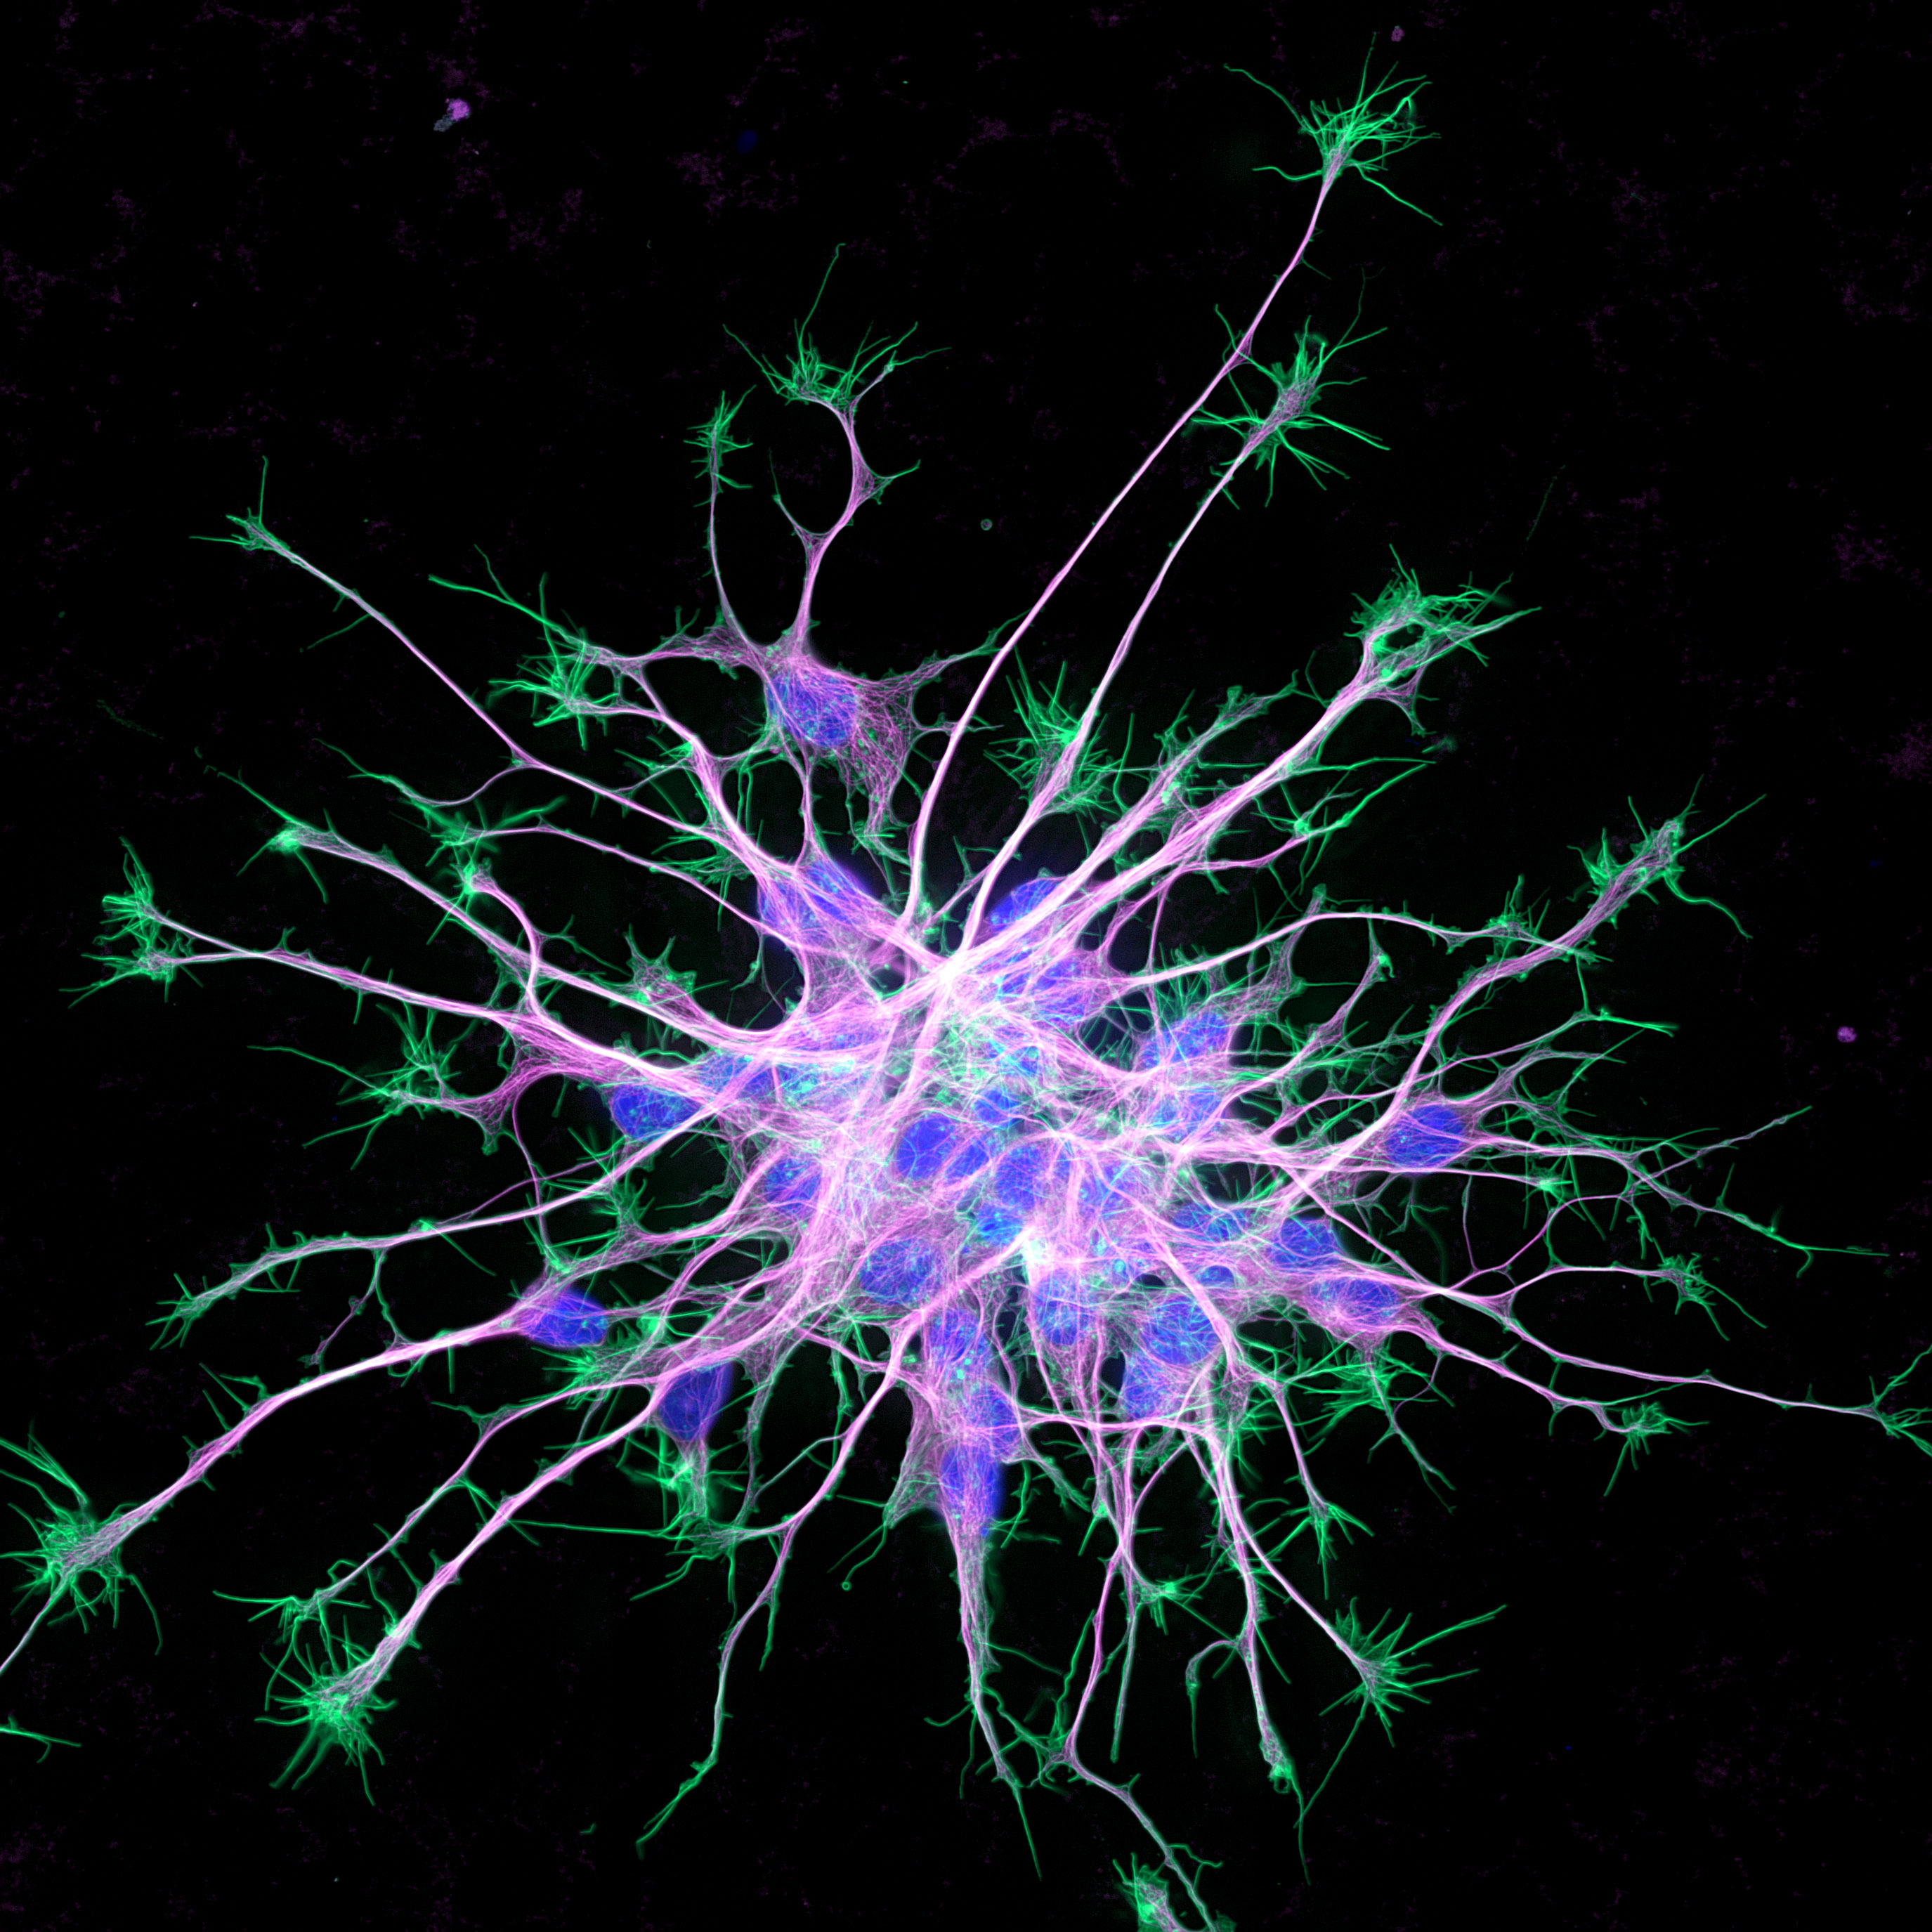 A Glimpse Inside Young Neurons Wins 2019 UCSF Sci